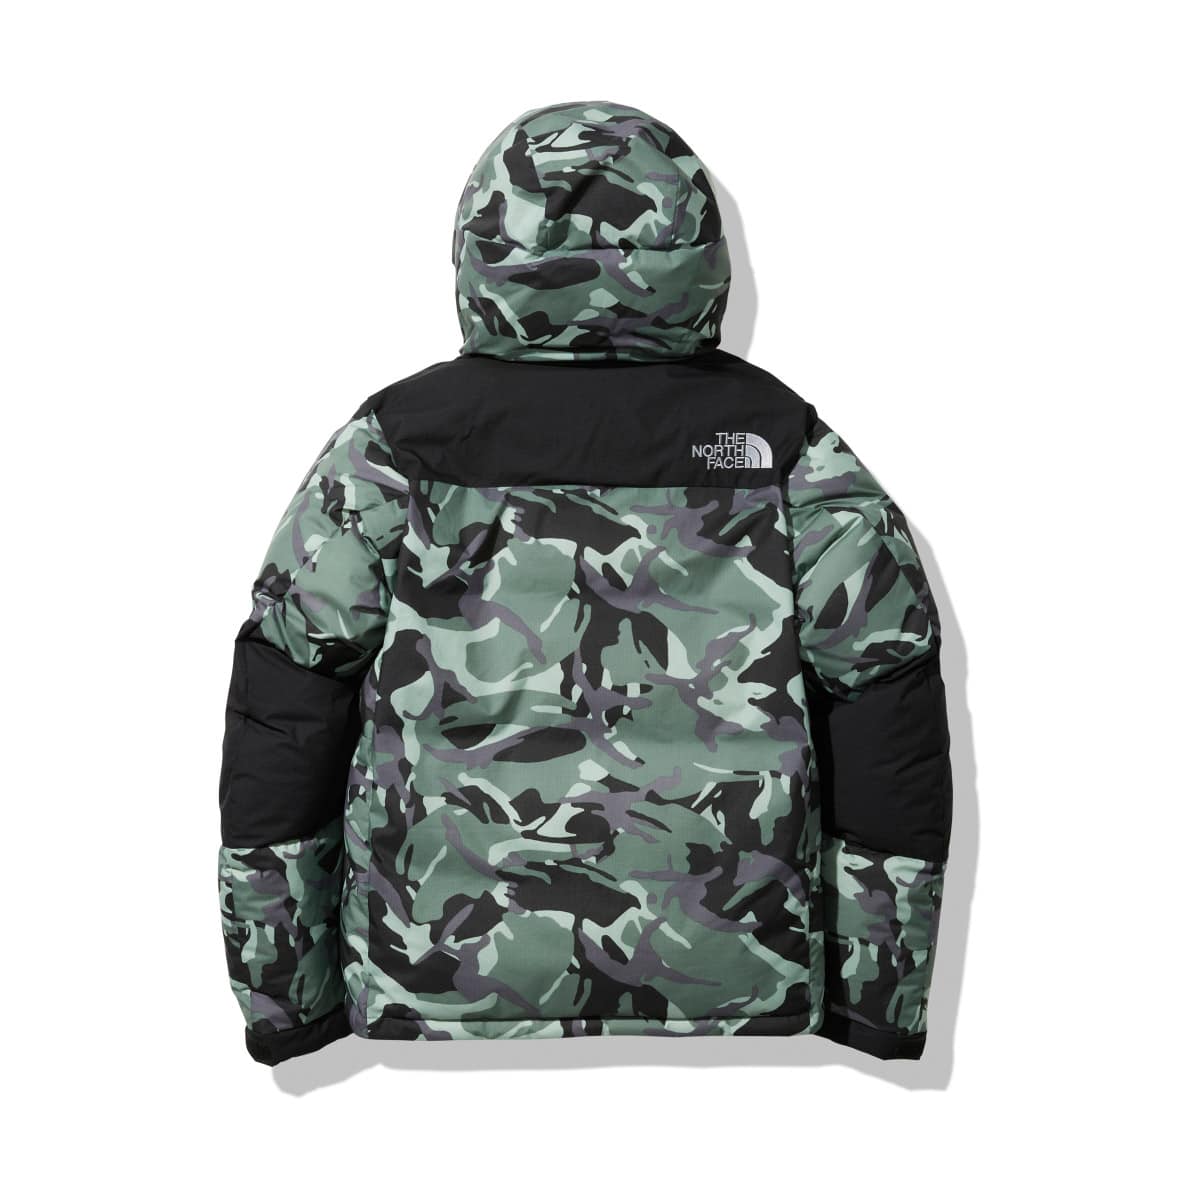 THE NORTH FACE NOVELTY BALTRO LIGHT JACKET ローレルリースグリーン ...